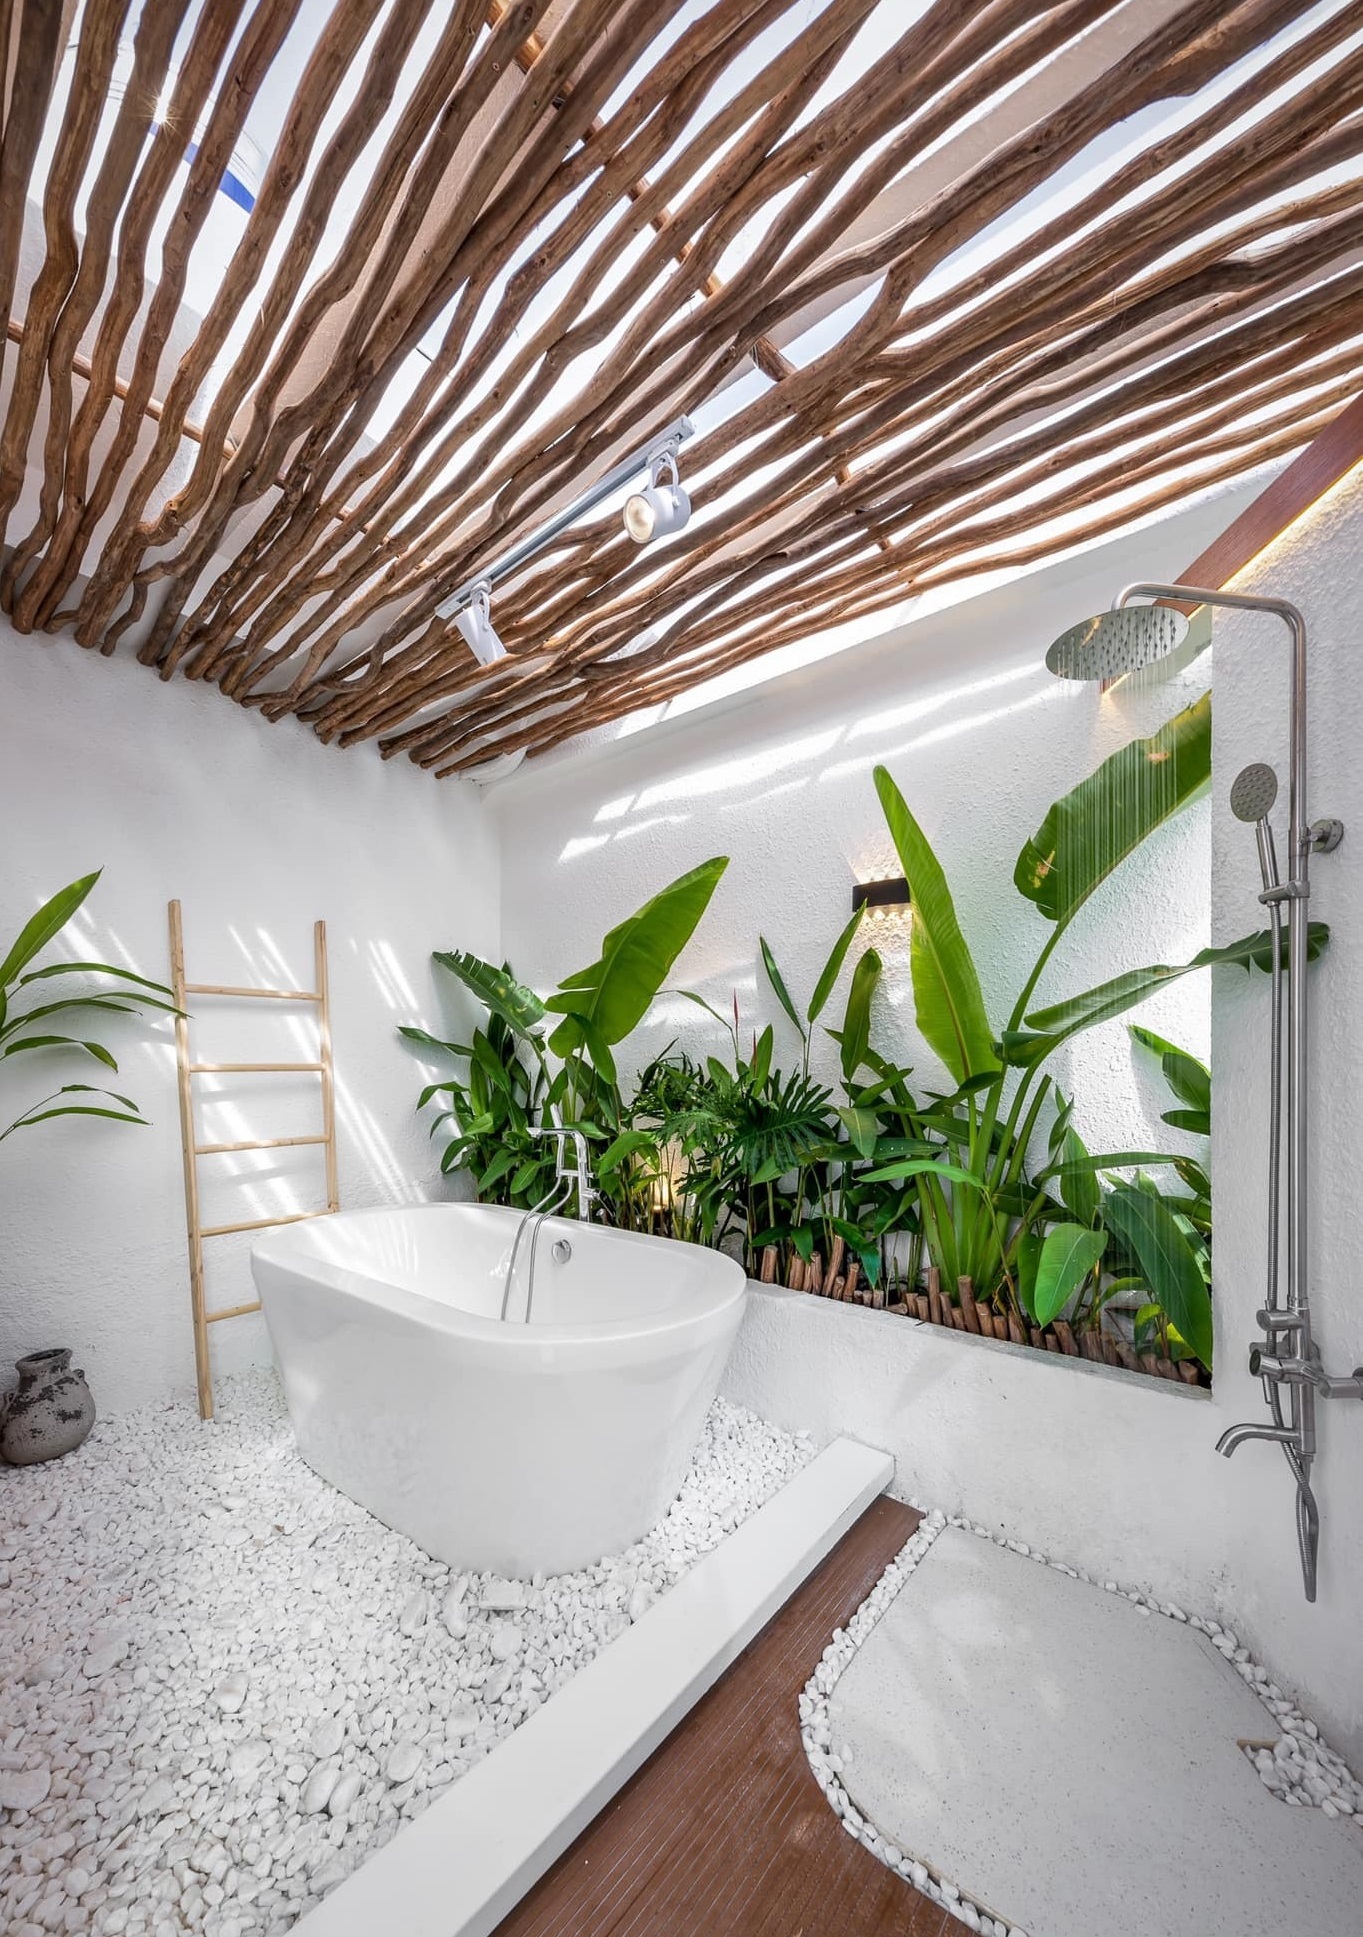 Resort garden, 'thousand star' bathroom in the middle of the sky in Ho Chi Minh City